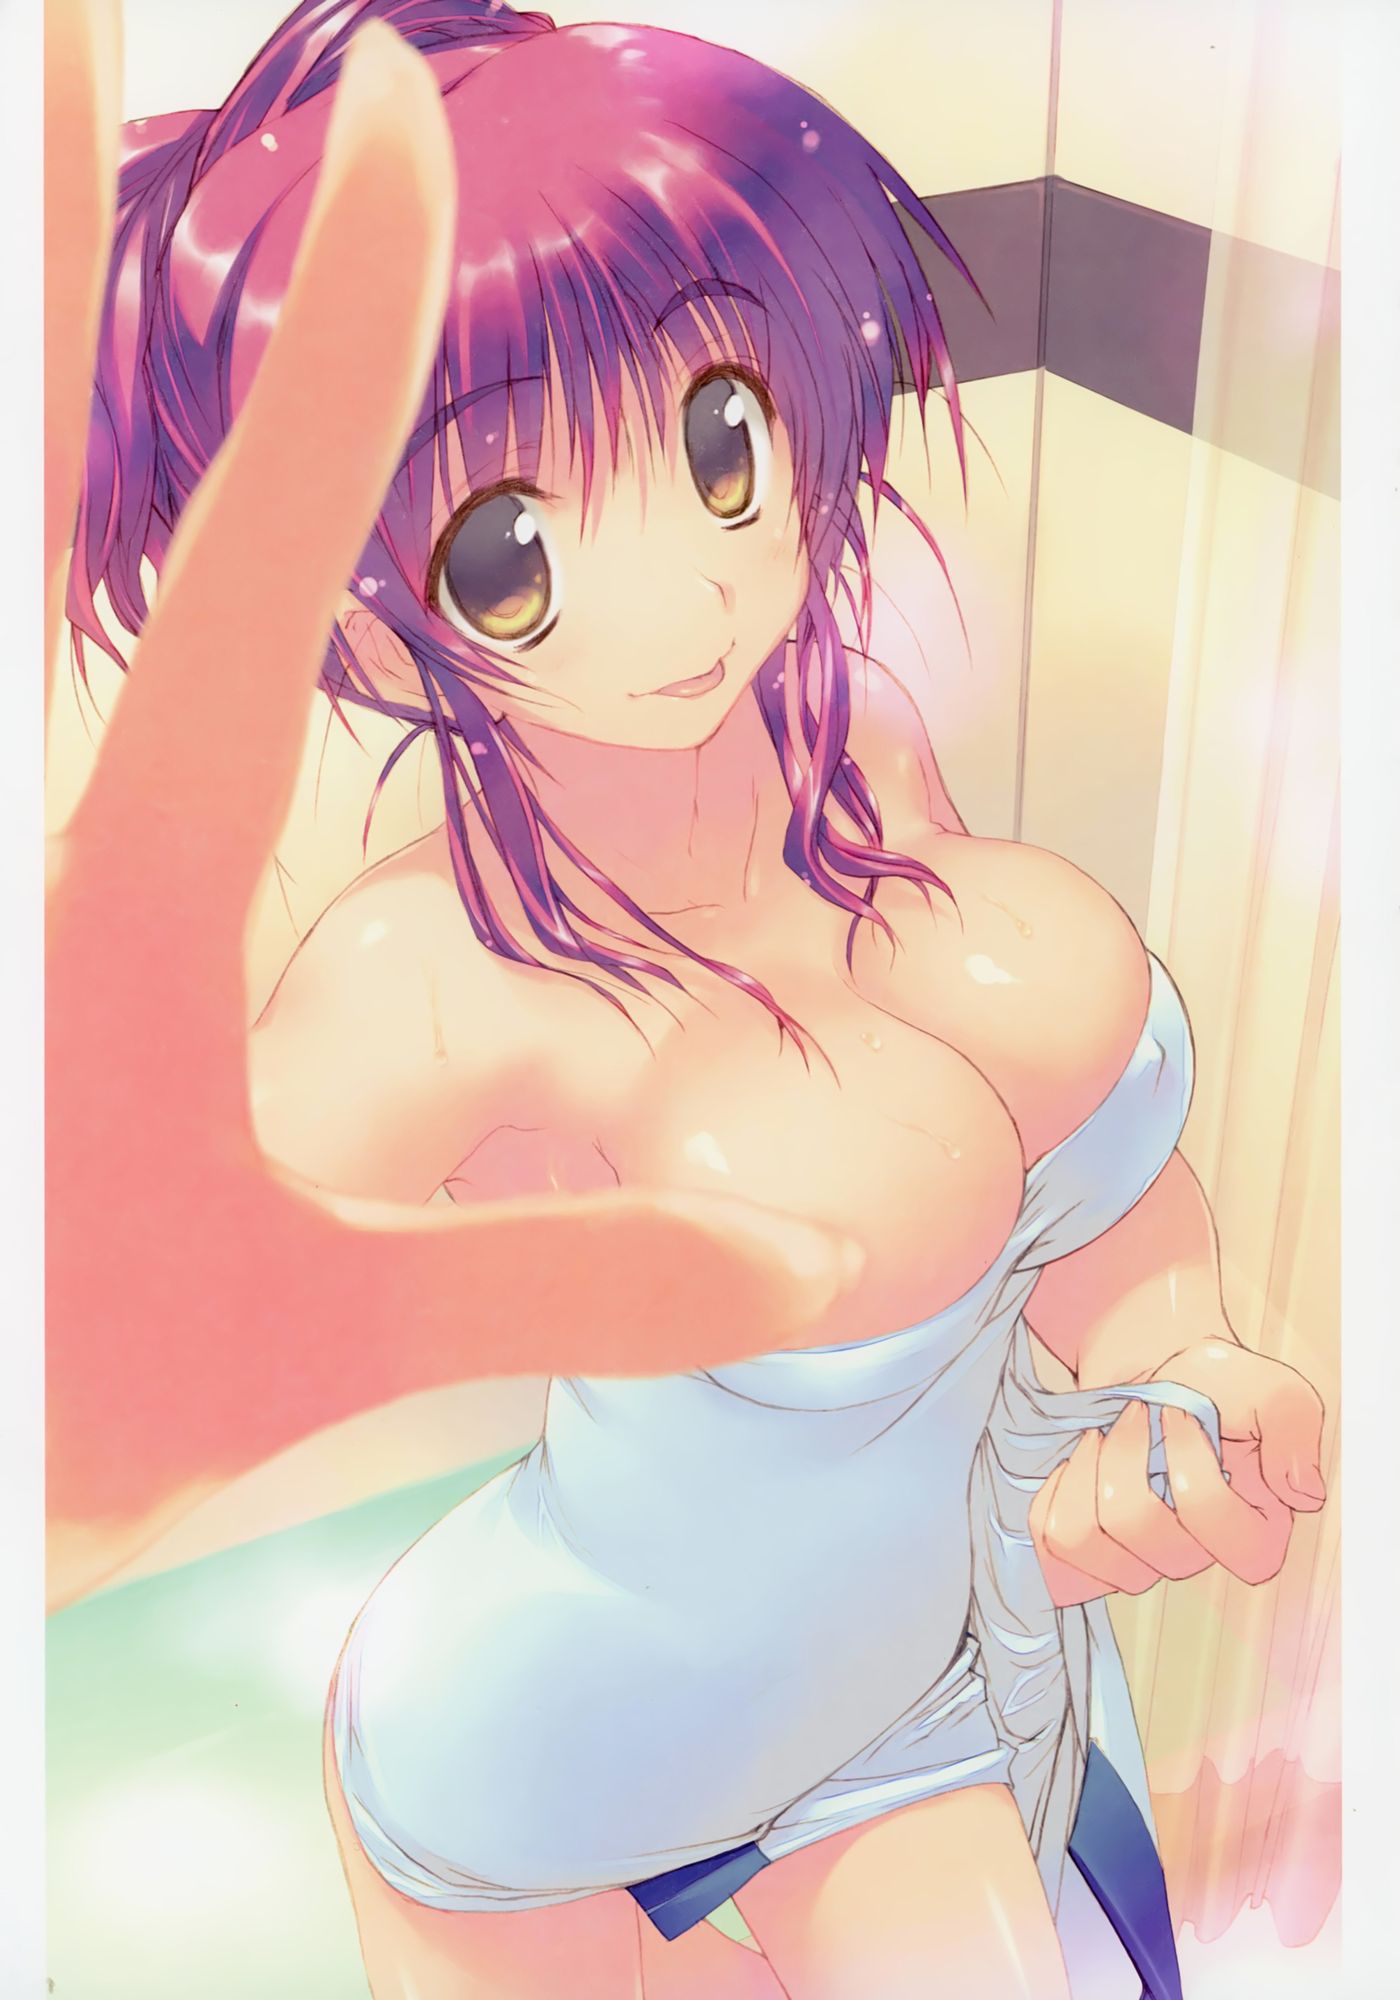 【Erotic Anime Summary】 Dosukebe Beauty and Beautiful Girls Hiding Their Nudity with a Single Towel 【Secondary Erotic】 6